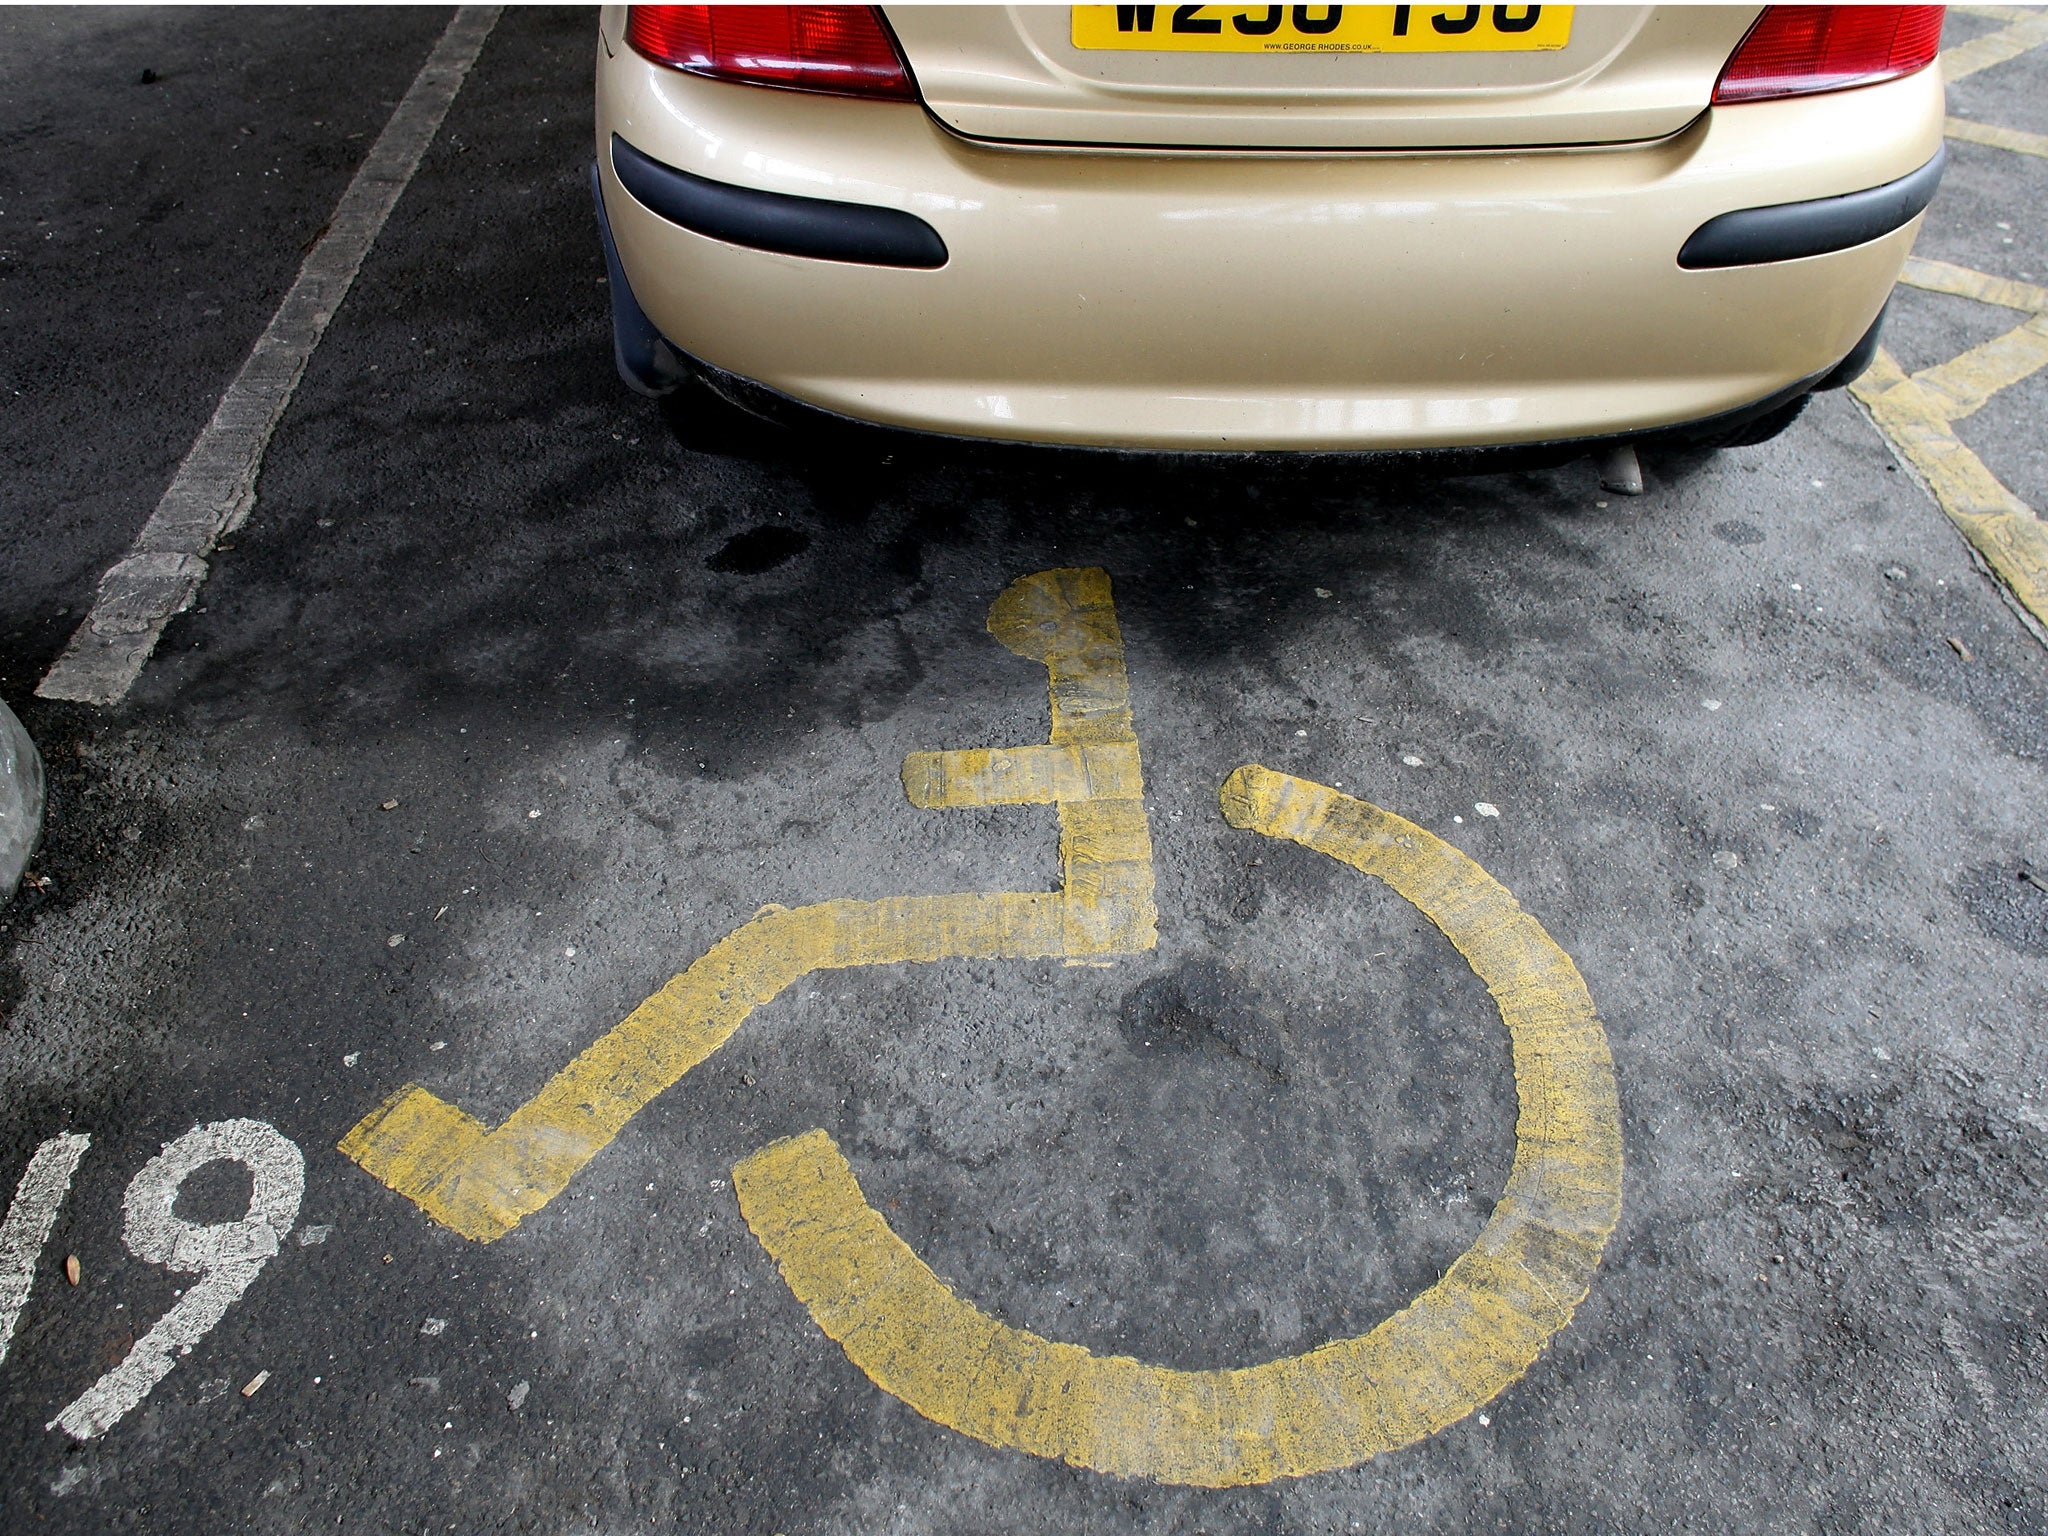 The disabled symbol is seen painted on the ground of a disabled car parking bay on February 16, 2011 in Bath, England.